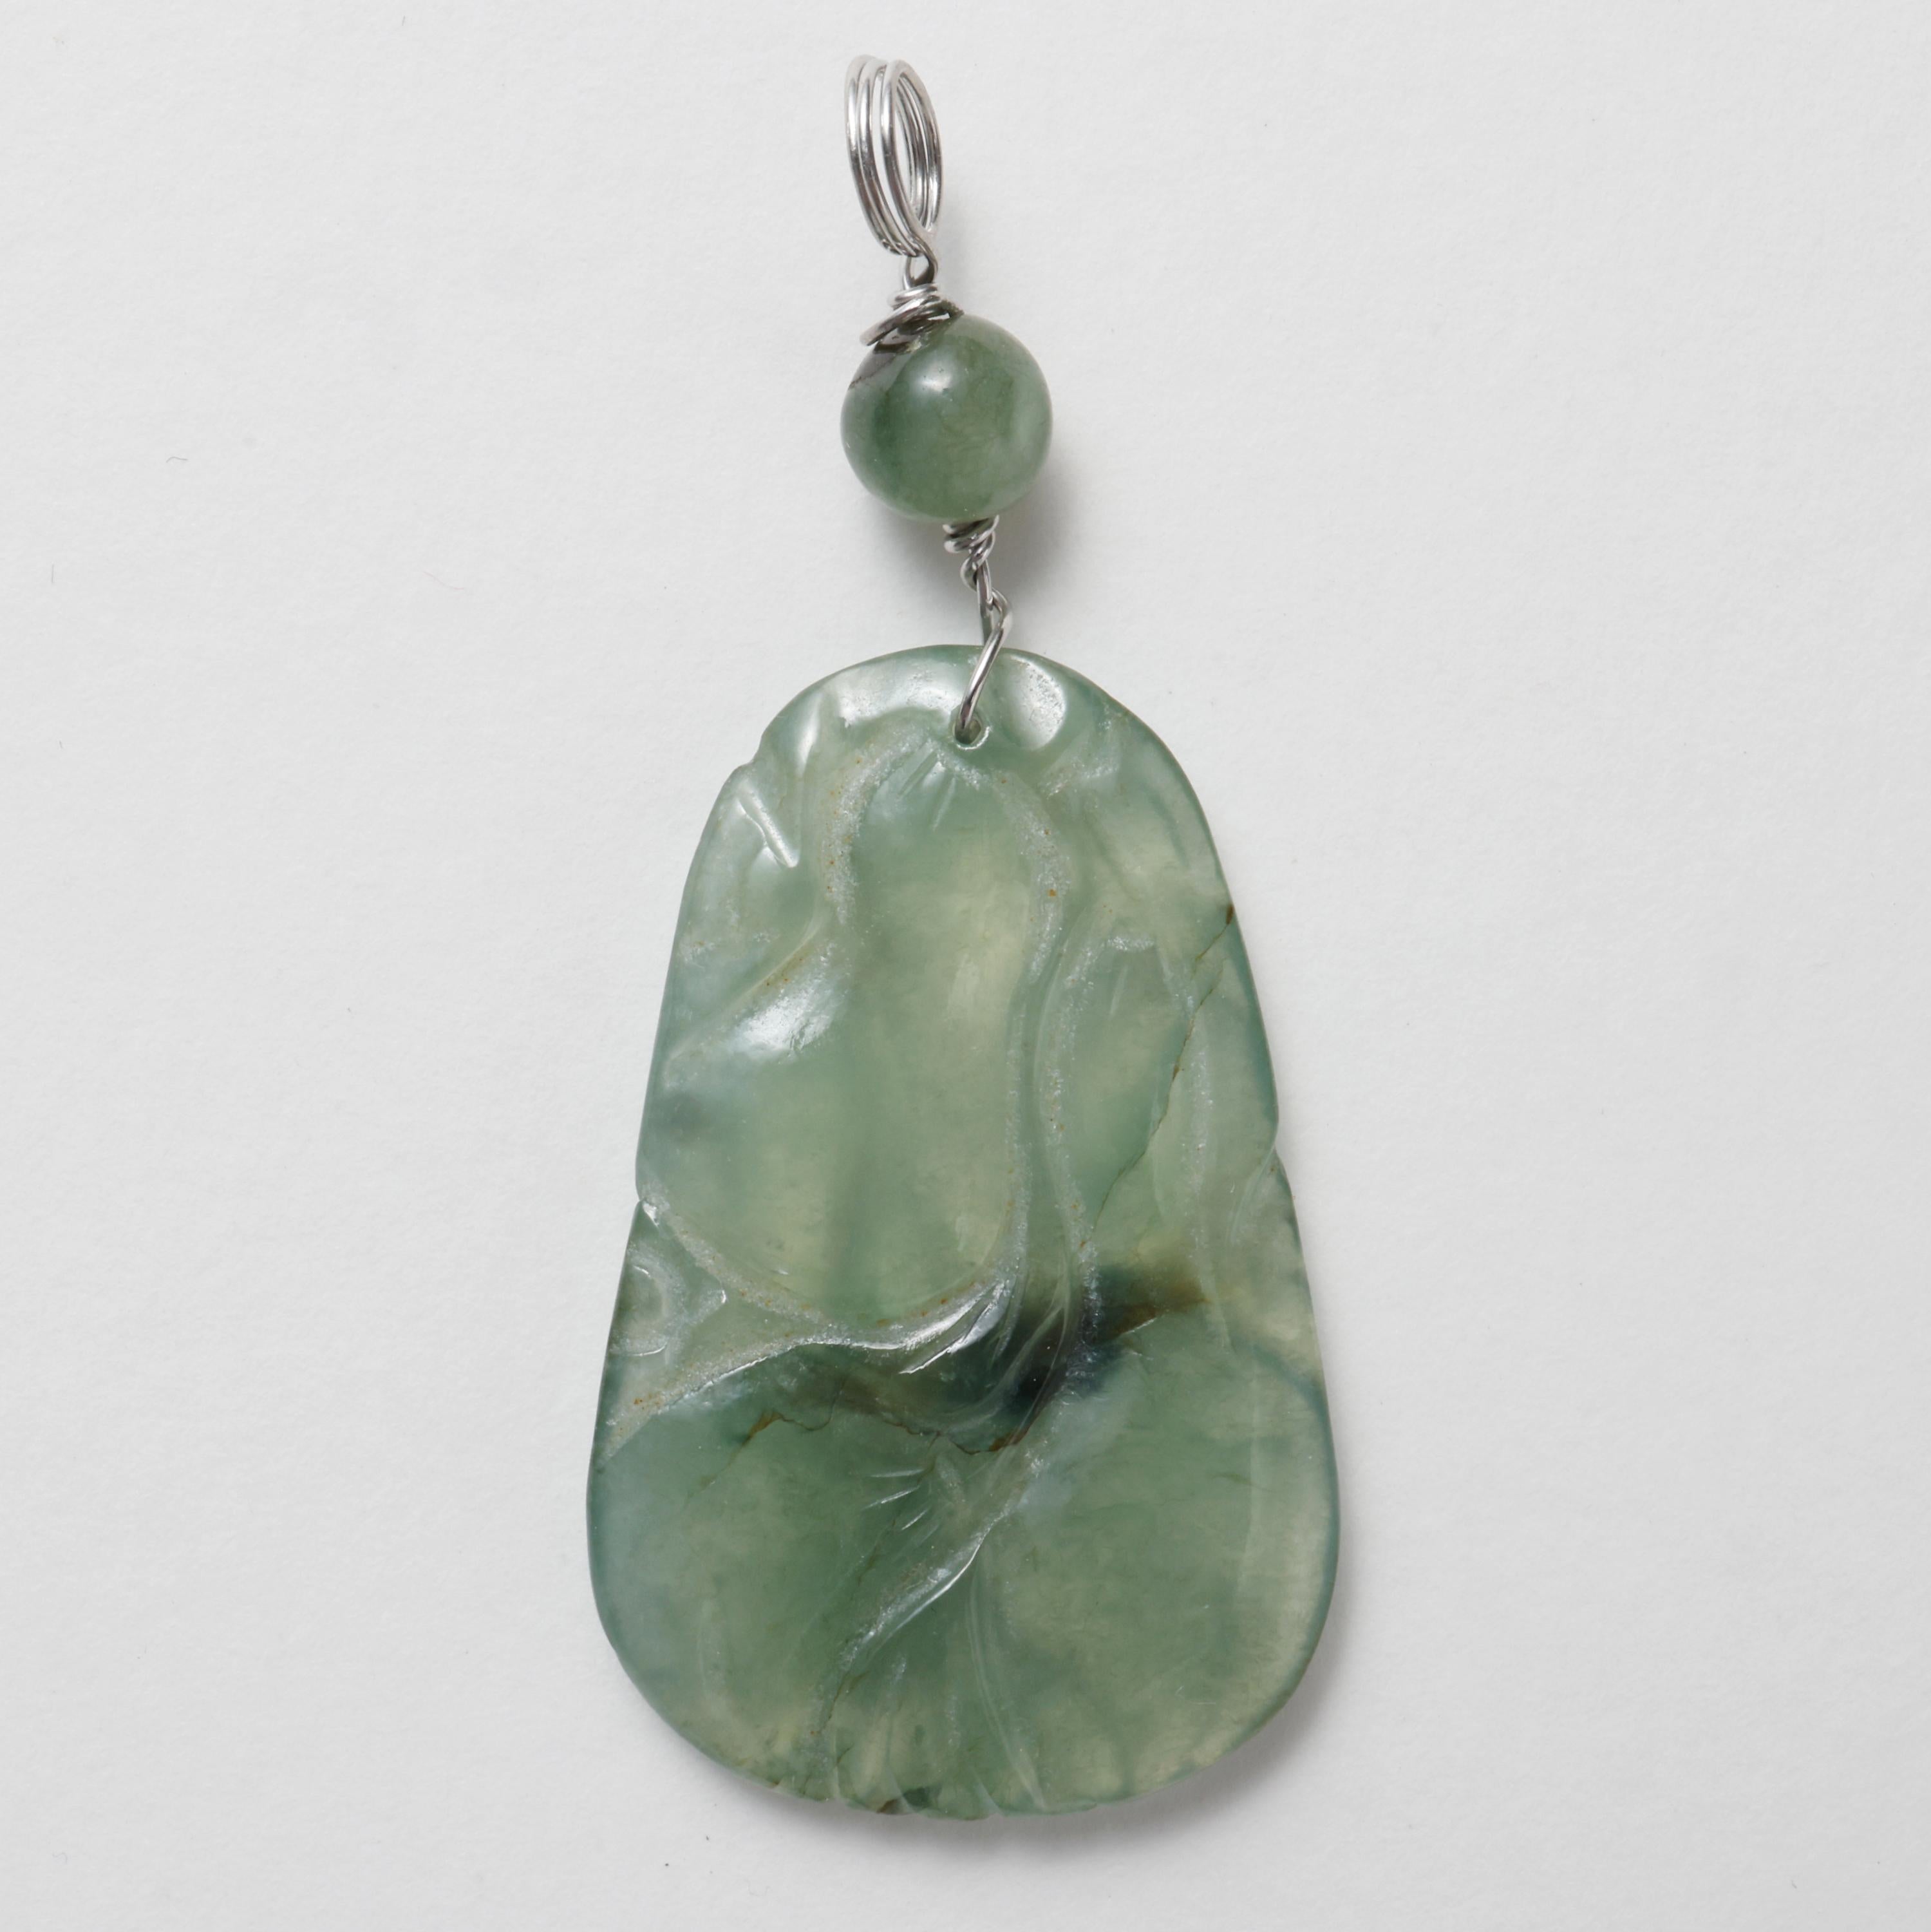 So translucent that it's nearly semi-transparent, this early Art Deco era (circa 1920) natural and untreated Burmese jadeite jade pendant has been carved to depict a grouping of melons or gourds. The lines of the carving are clean, sketch-like in